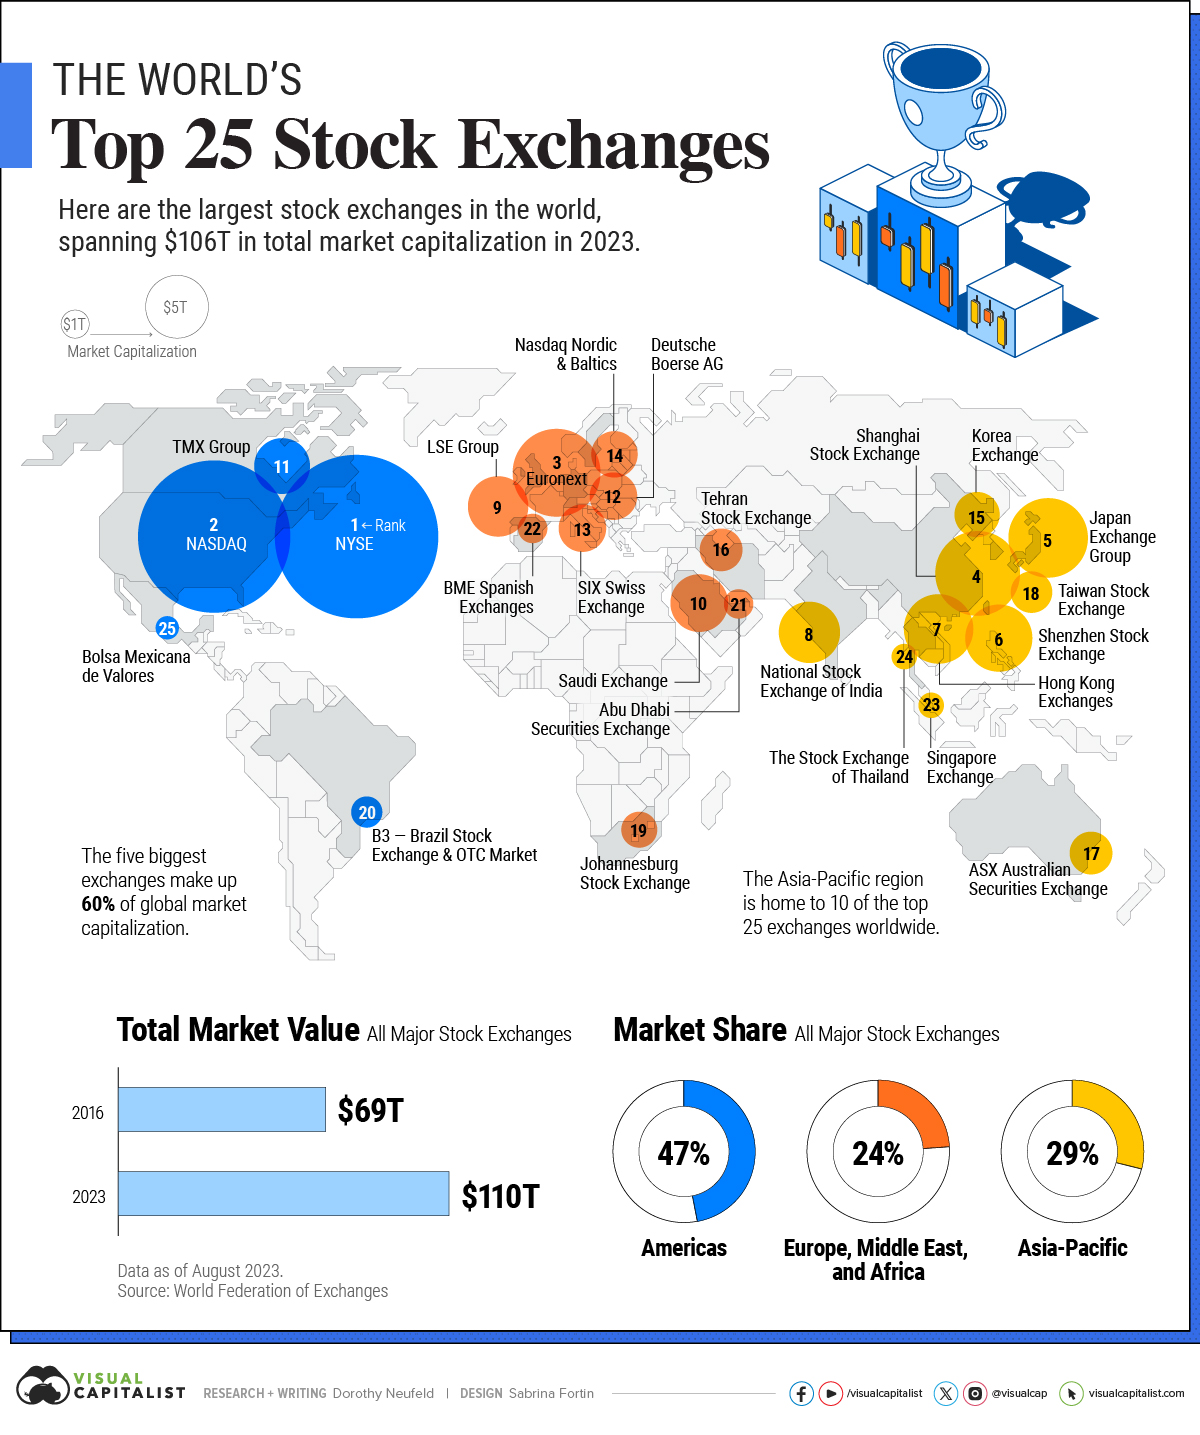 Mapped: The Largest Stock Exchanges in the World